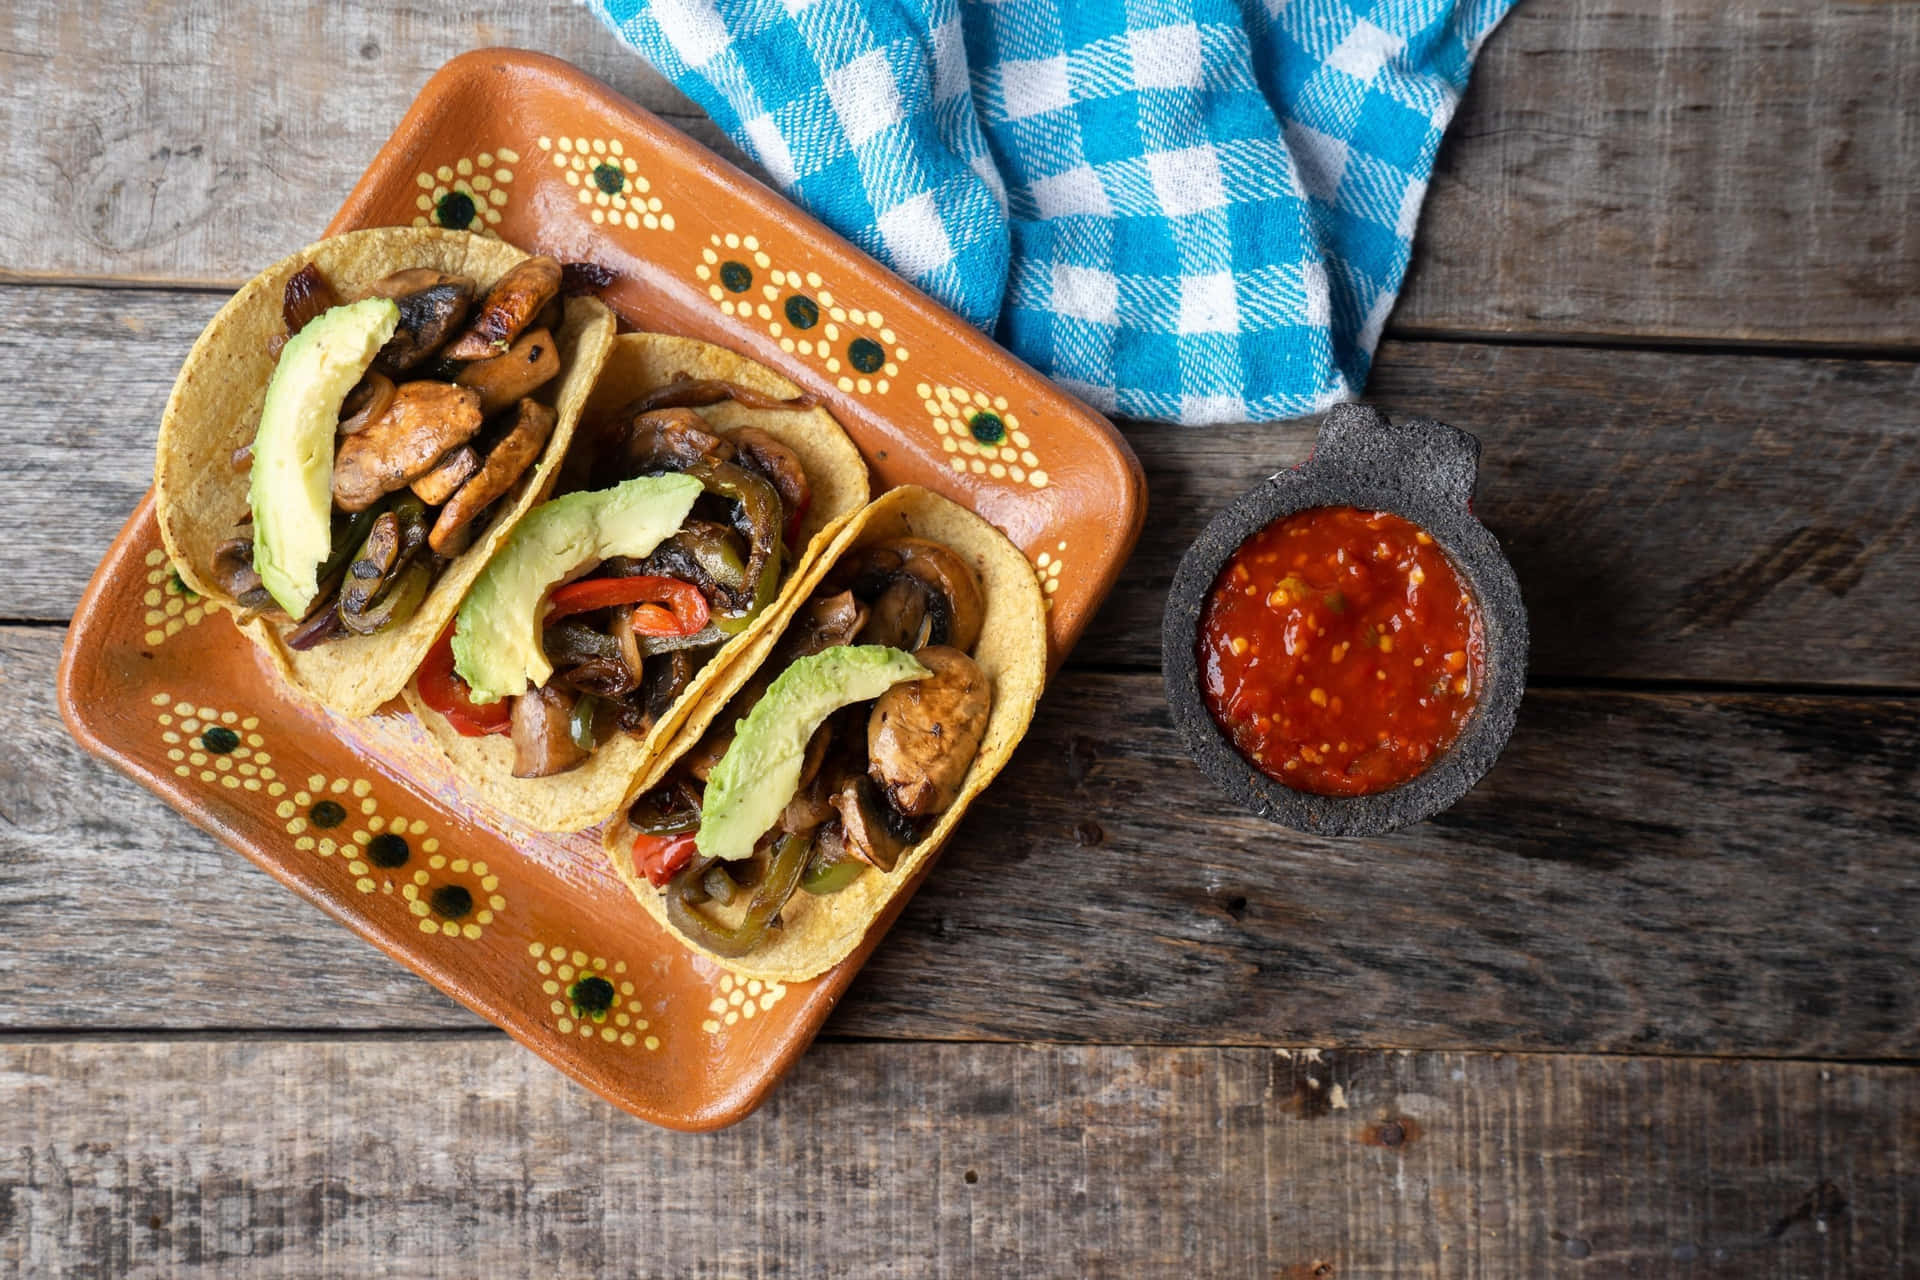 Enjoy deliciously flavorful Mexican cuisine with Mexico Foods!